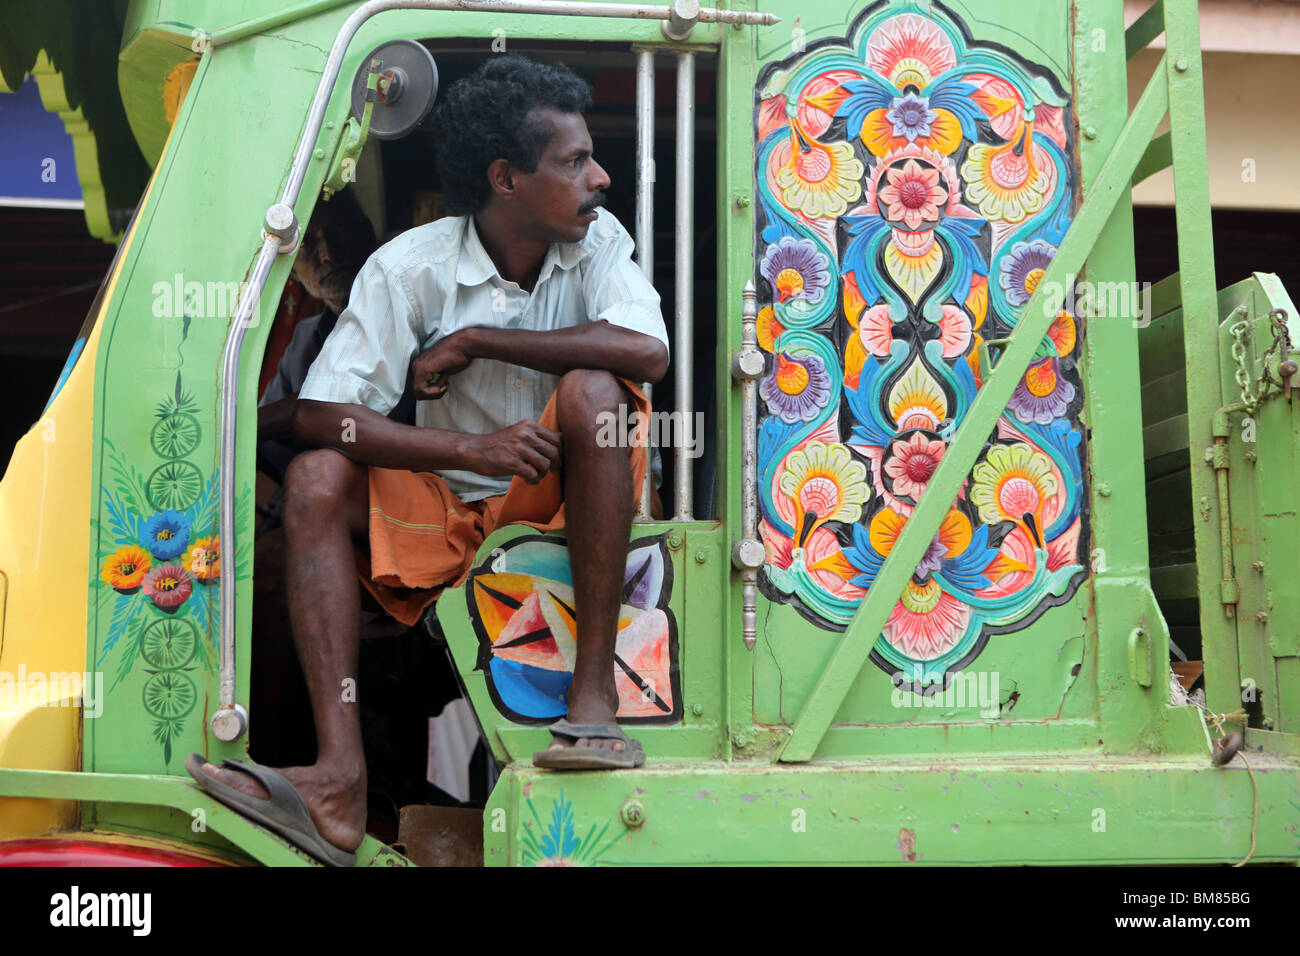 A man sitting a decorated truck in Kochi, formerly known as Cochin in Kerala, India. Stock Photo